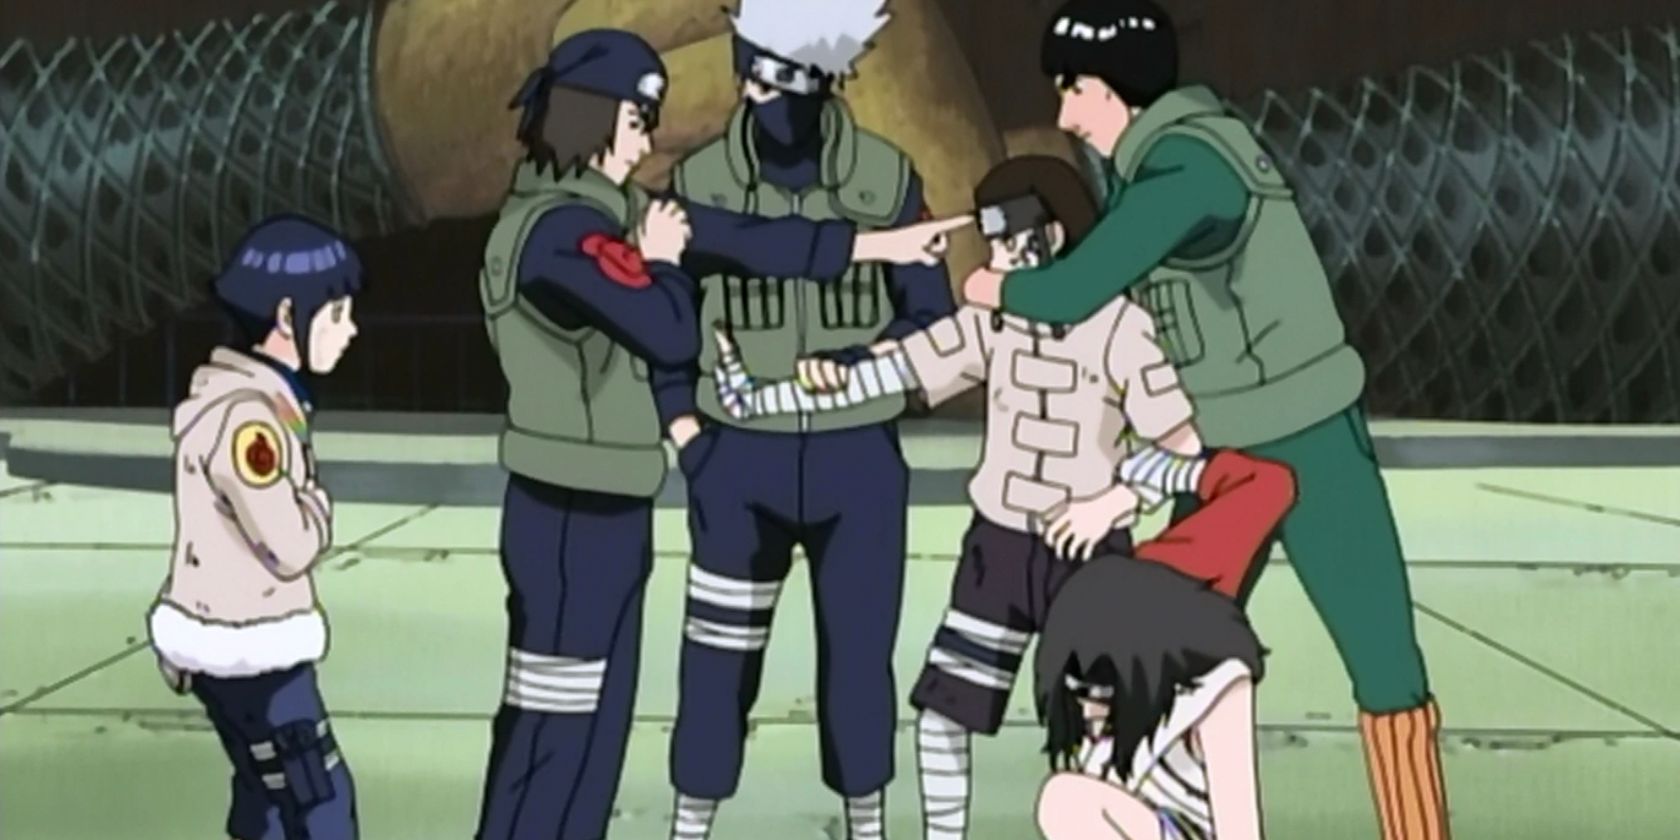 The teachers separate Neji and Hinata during the Chunin match in Naruto